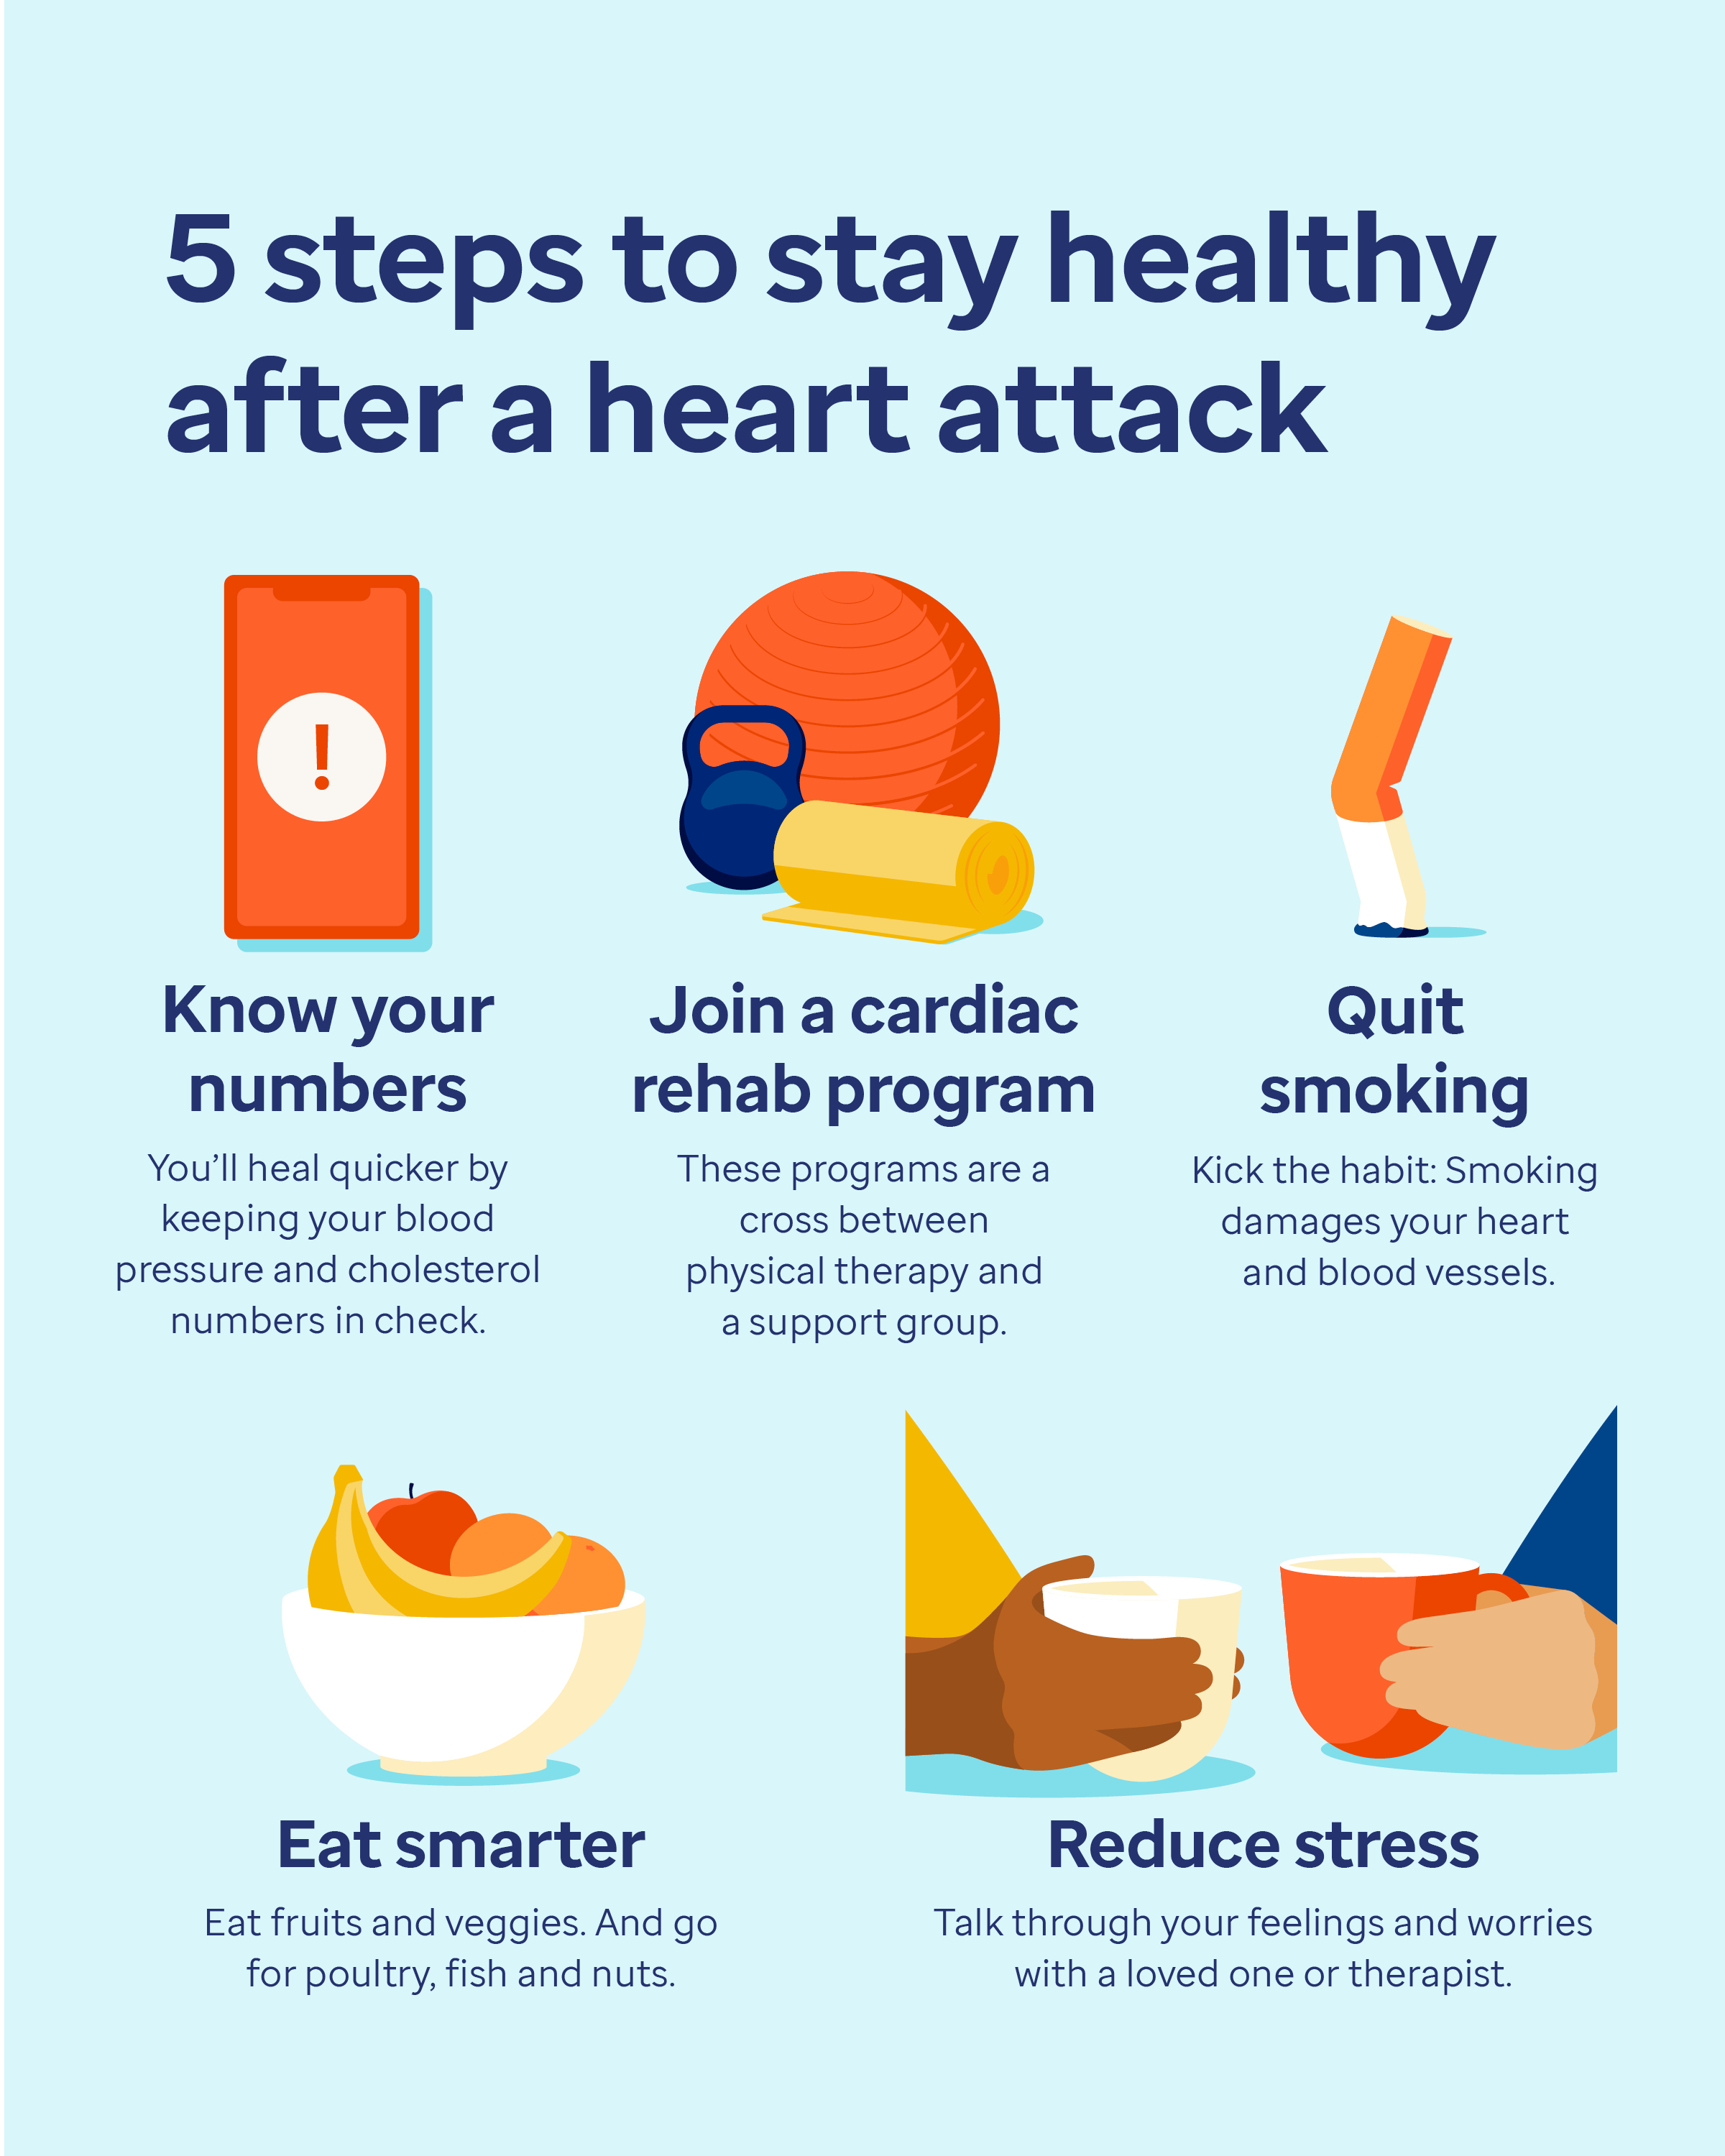 5 steps to stay healthy after a heart attack